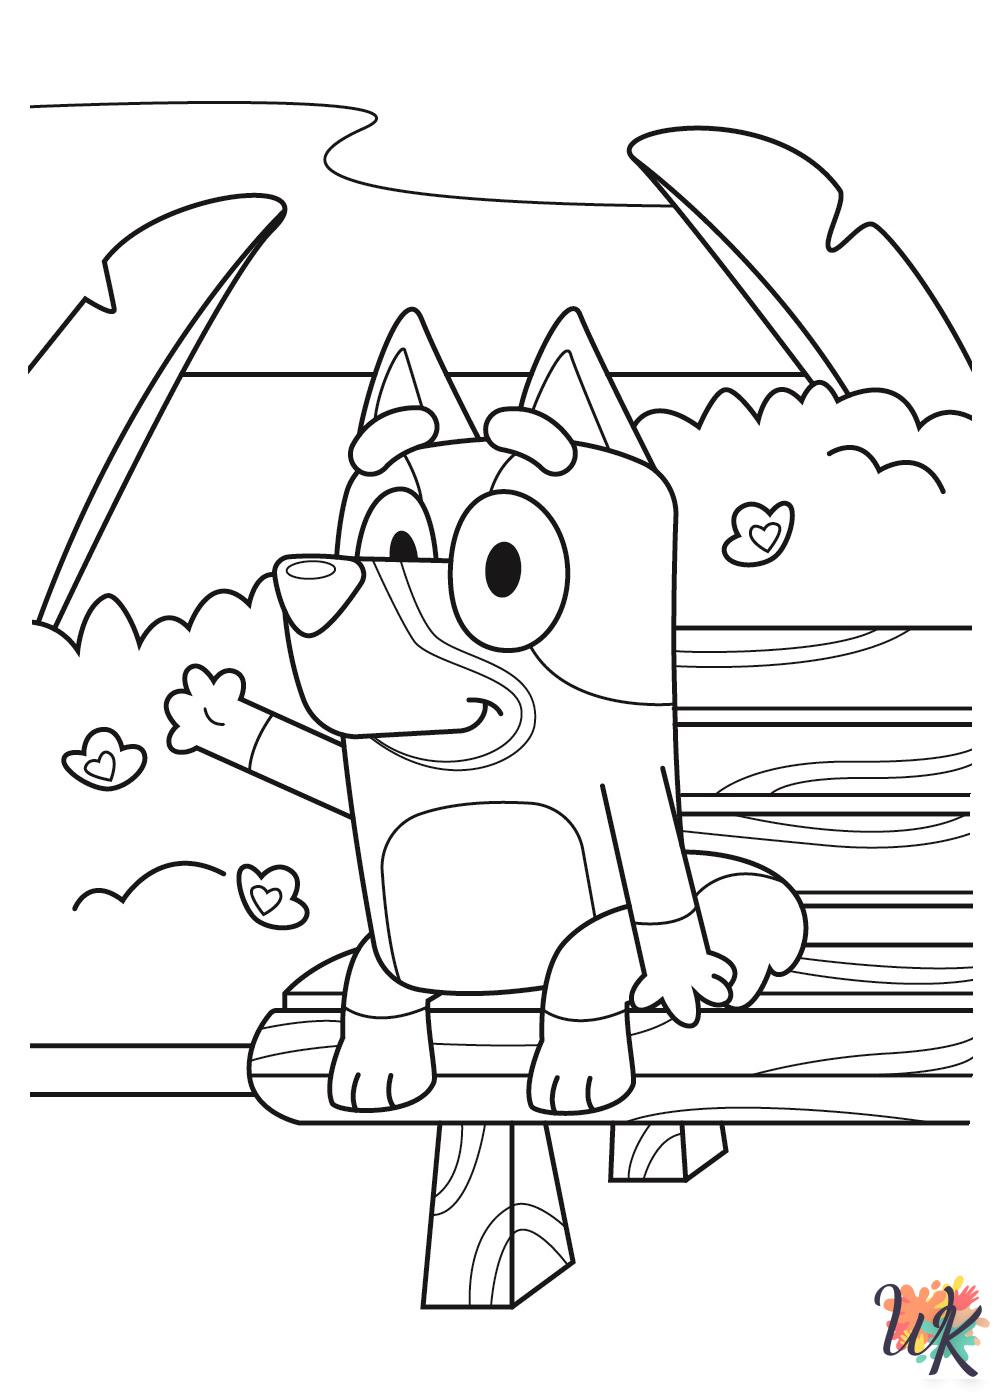 Bluey Coloring Pages For Kids - ColoringPagesWK.com